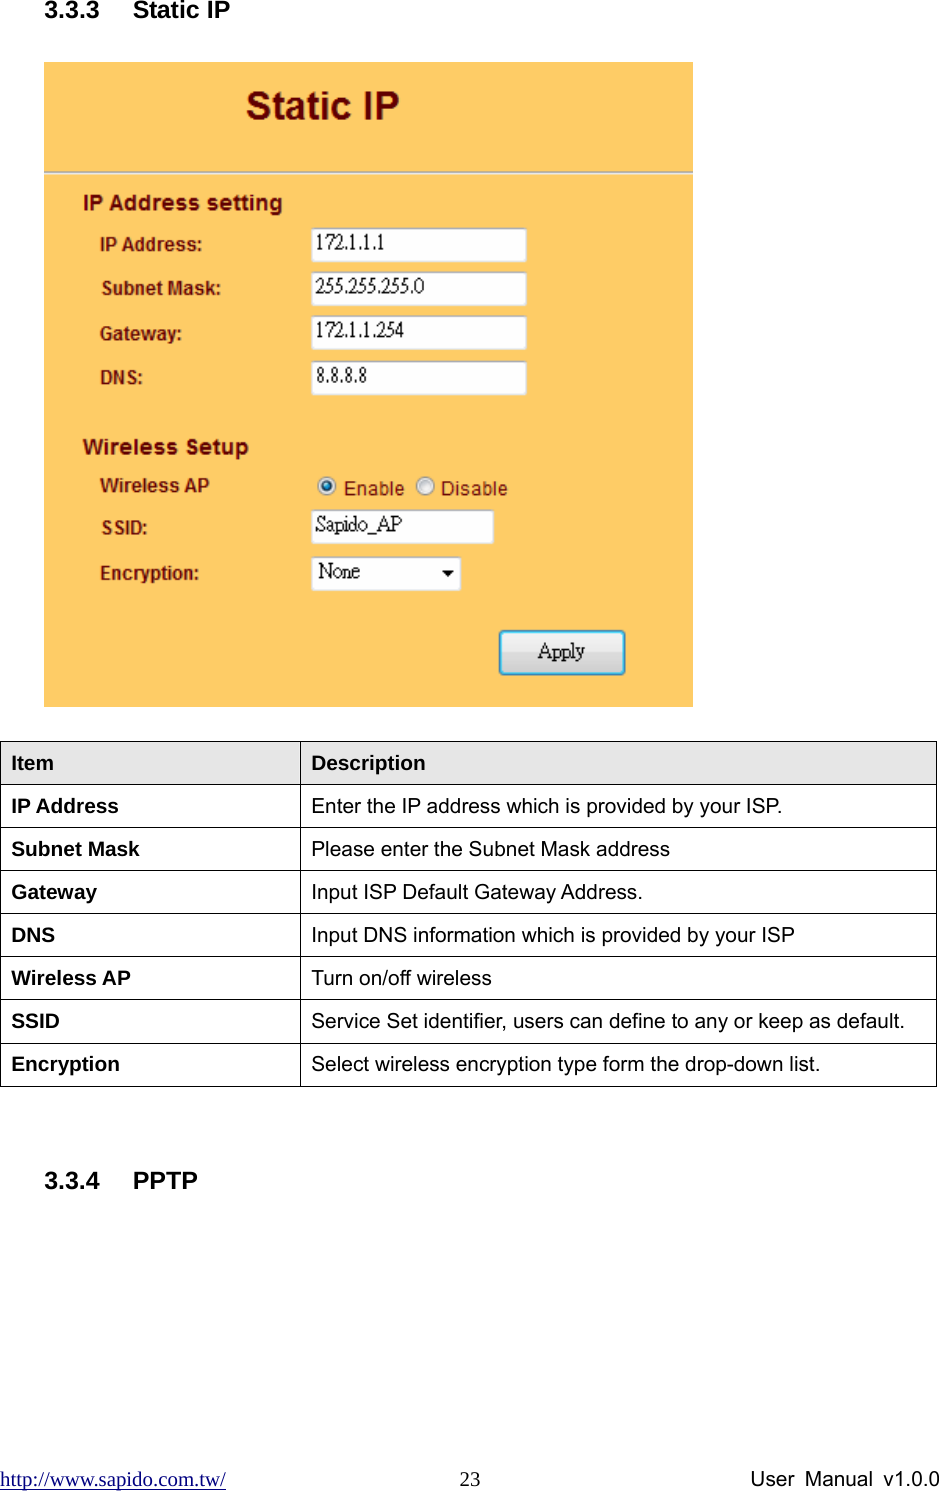 http://www.sapido.com.tw/                User Manual v1.0.0 233.3.3 Static IP  Item  Description IP Address  Enter the IP address which is provided by your ISP.     Subnet Mask  Please enter the Subnet Mask address Gateway  Input ISP Default Gateway Address. DNS   Input DNS information which is provided by your ISP Wireless AP  Turn on/off wireless SSID  Service Set identifier, users can define to any or keep as default. Encryption  Select wireless encryption type form the drop-down list.  3.3.4 PPTP 